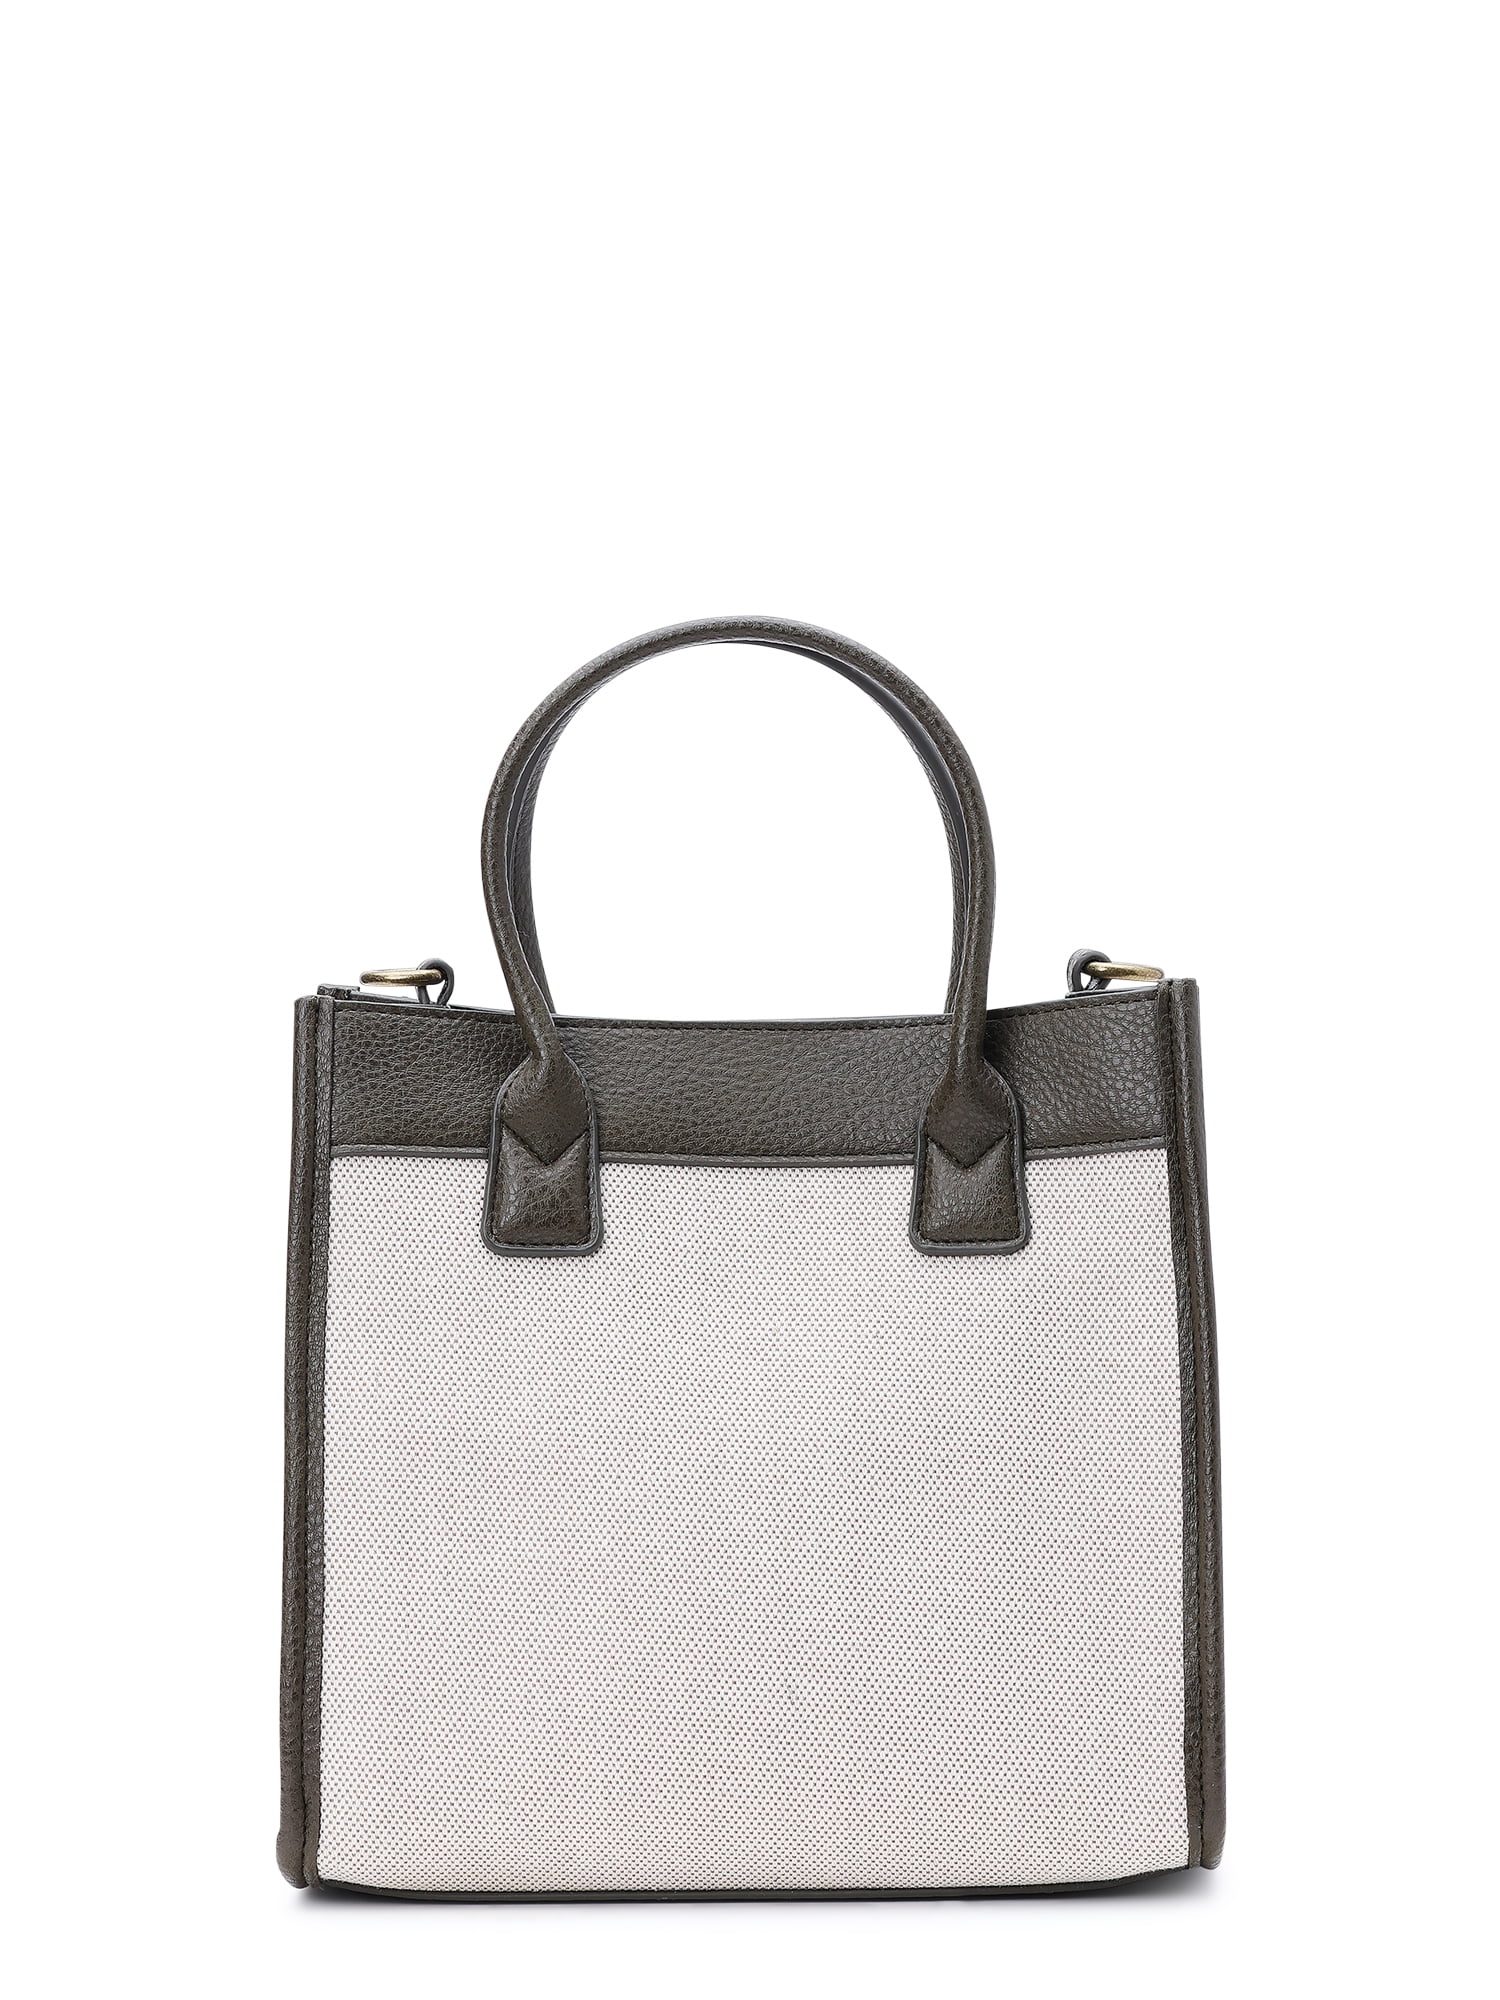 Manhattan Large Canvas And Leather Tote Bag in Beige - Saint Laurent